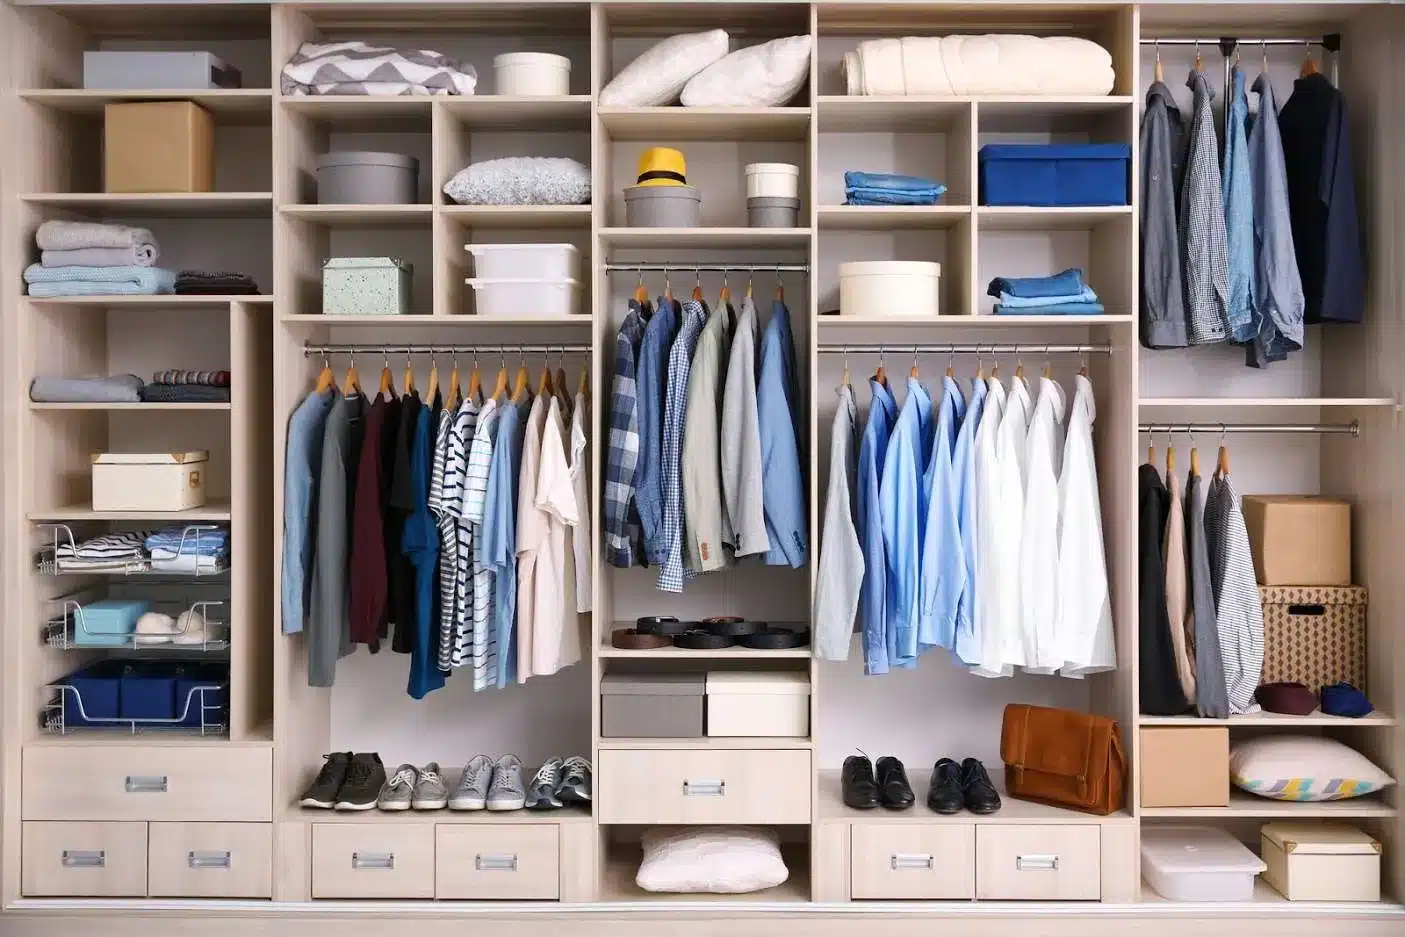 How To Organize Wardrobe Without Hangers